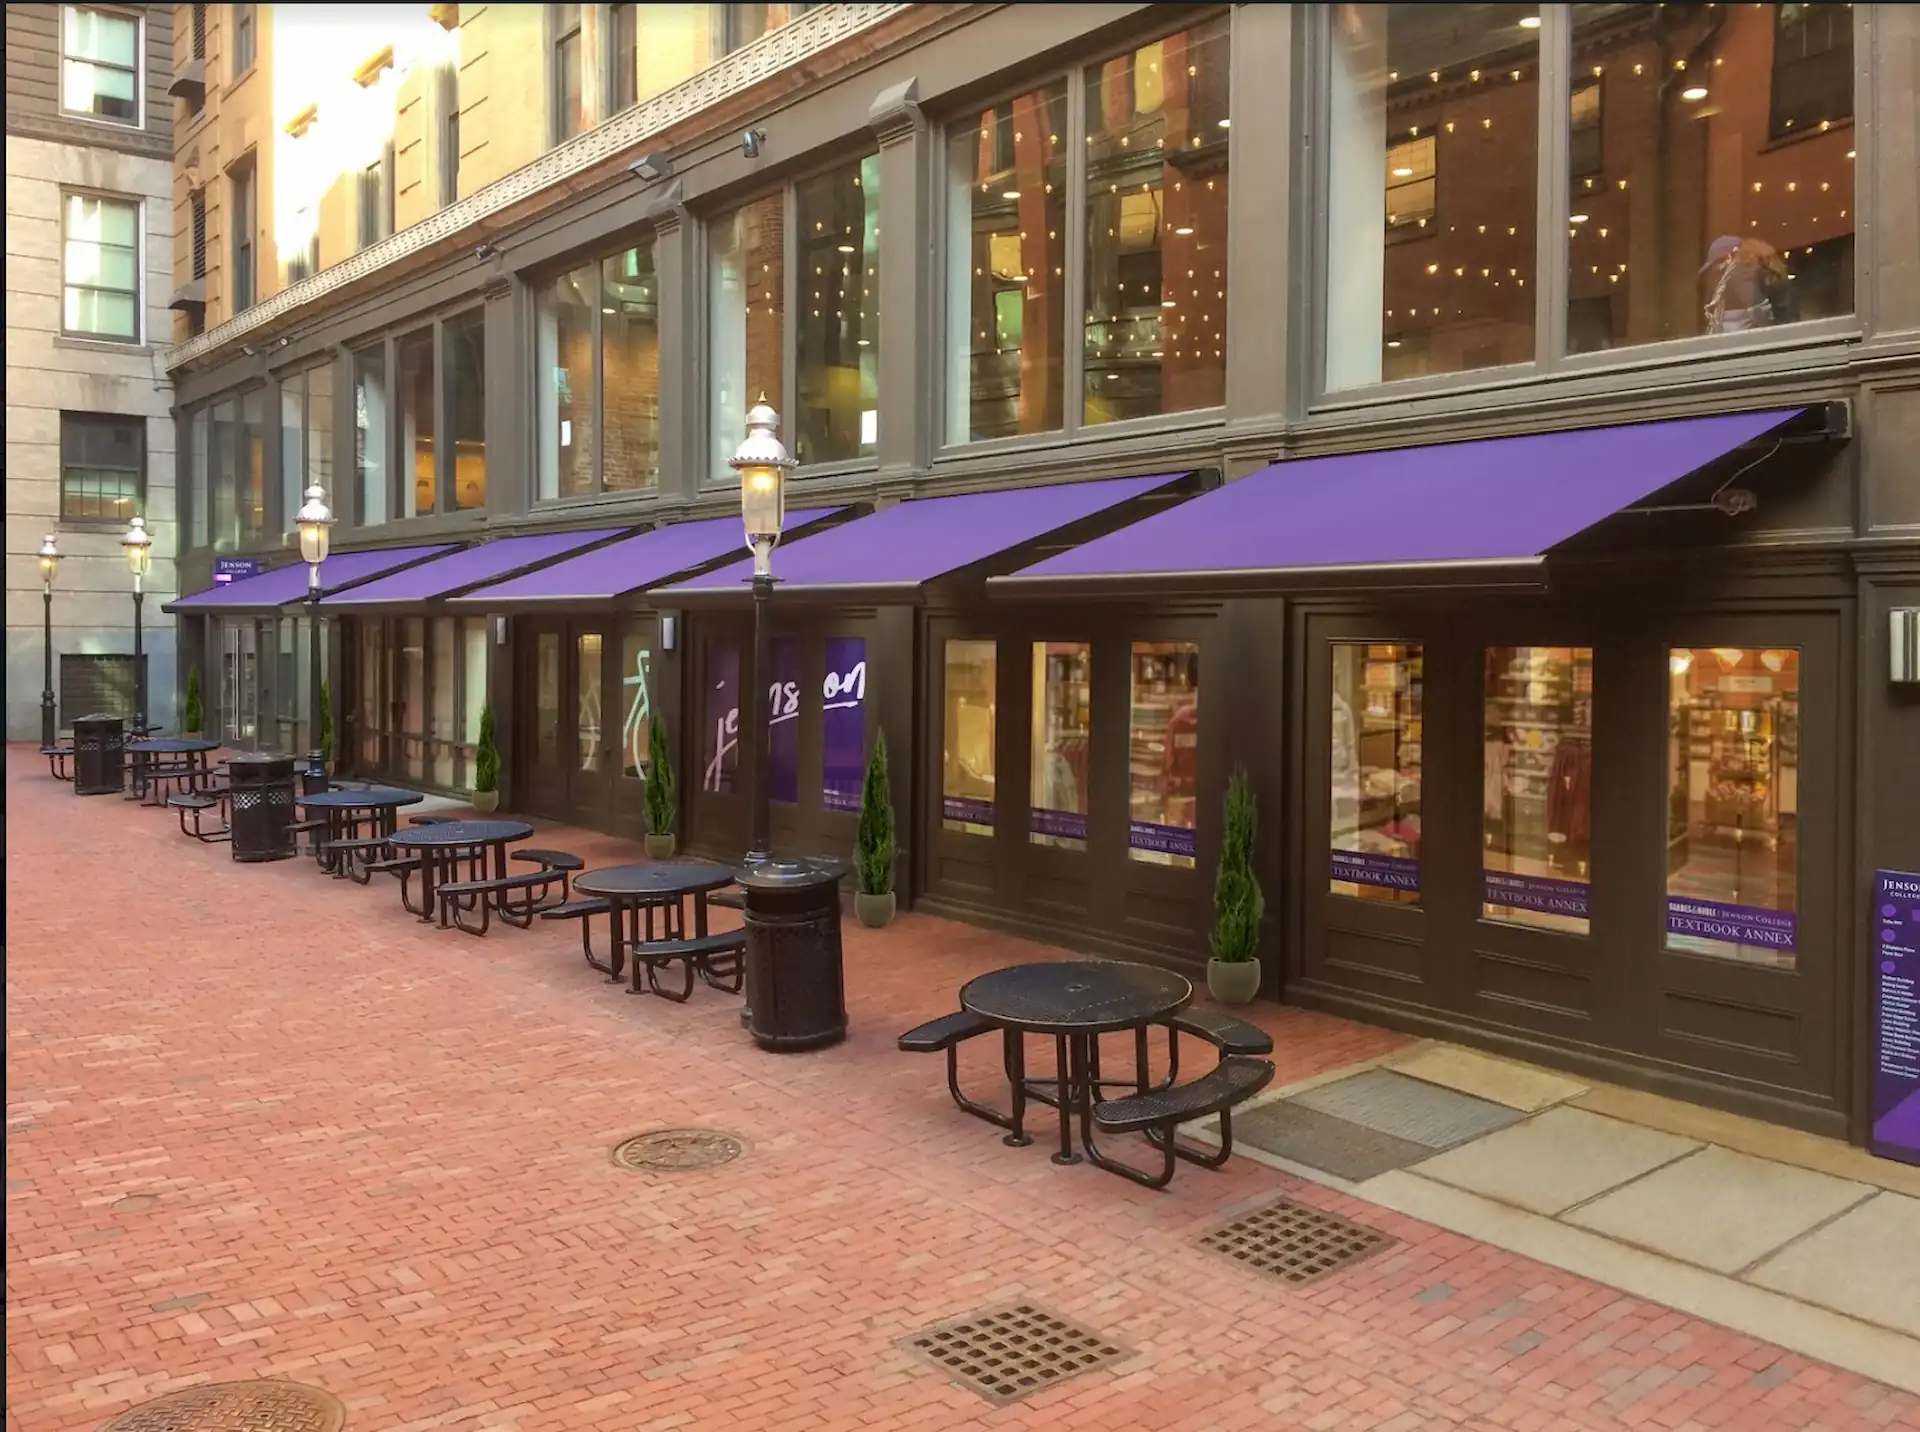 Exterior shot of an upscale store with a violet commercial awning extended from 5 windows on the facade.